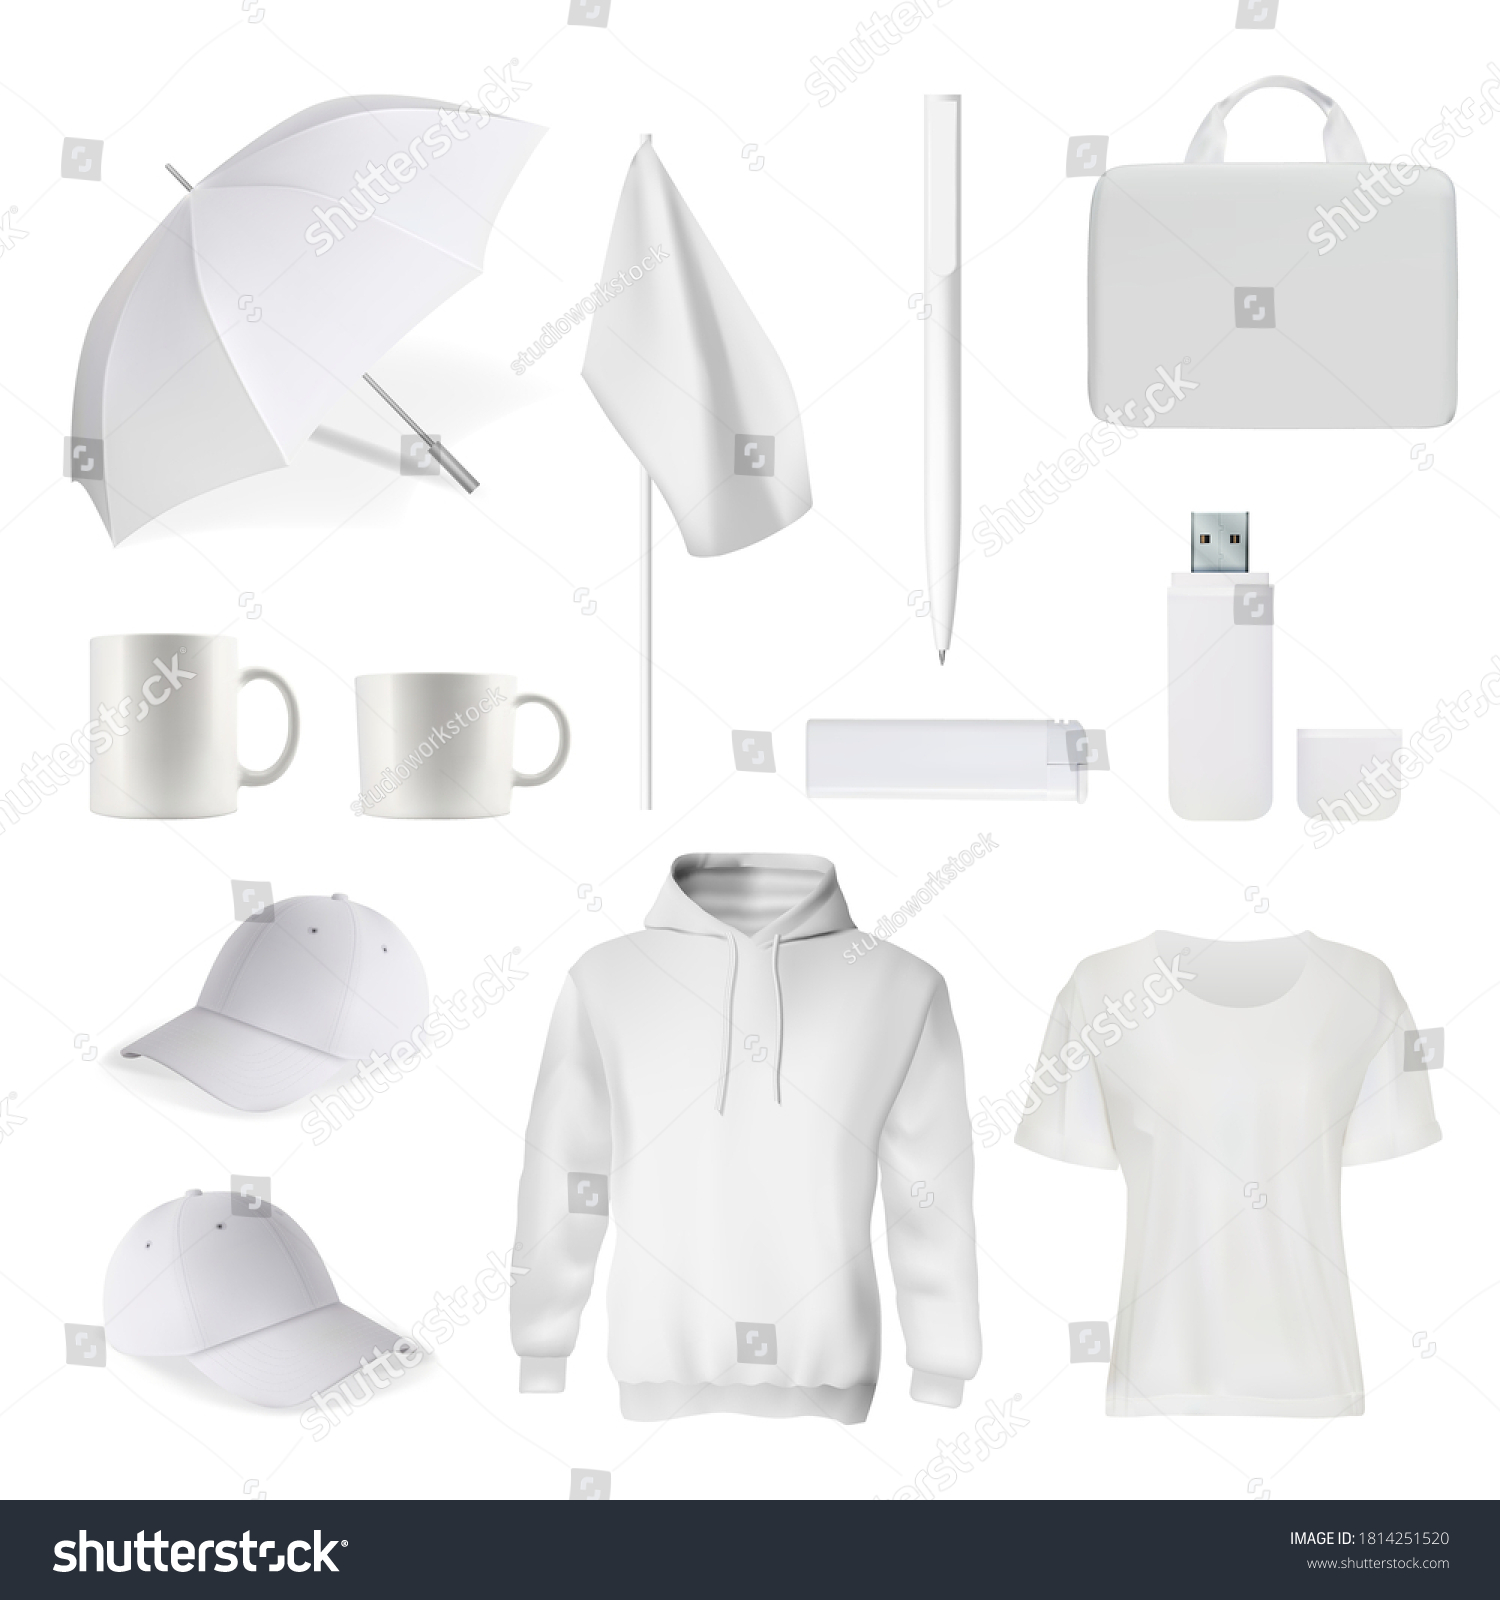 stock-vector-branding-white-item-corporate-identity-template-promotional-gift-realistic-vector-t-shirt-cap-1814251520